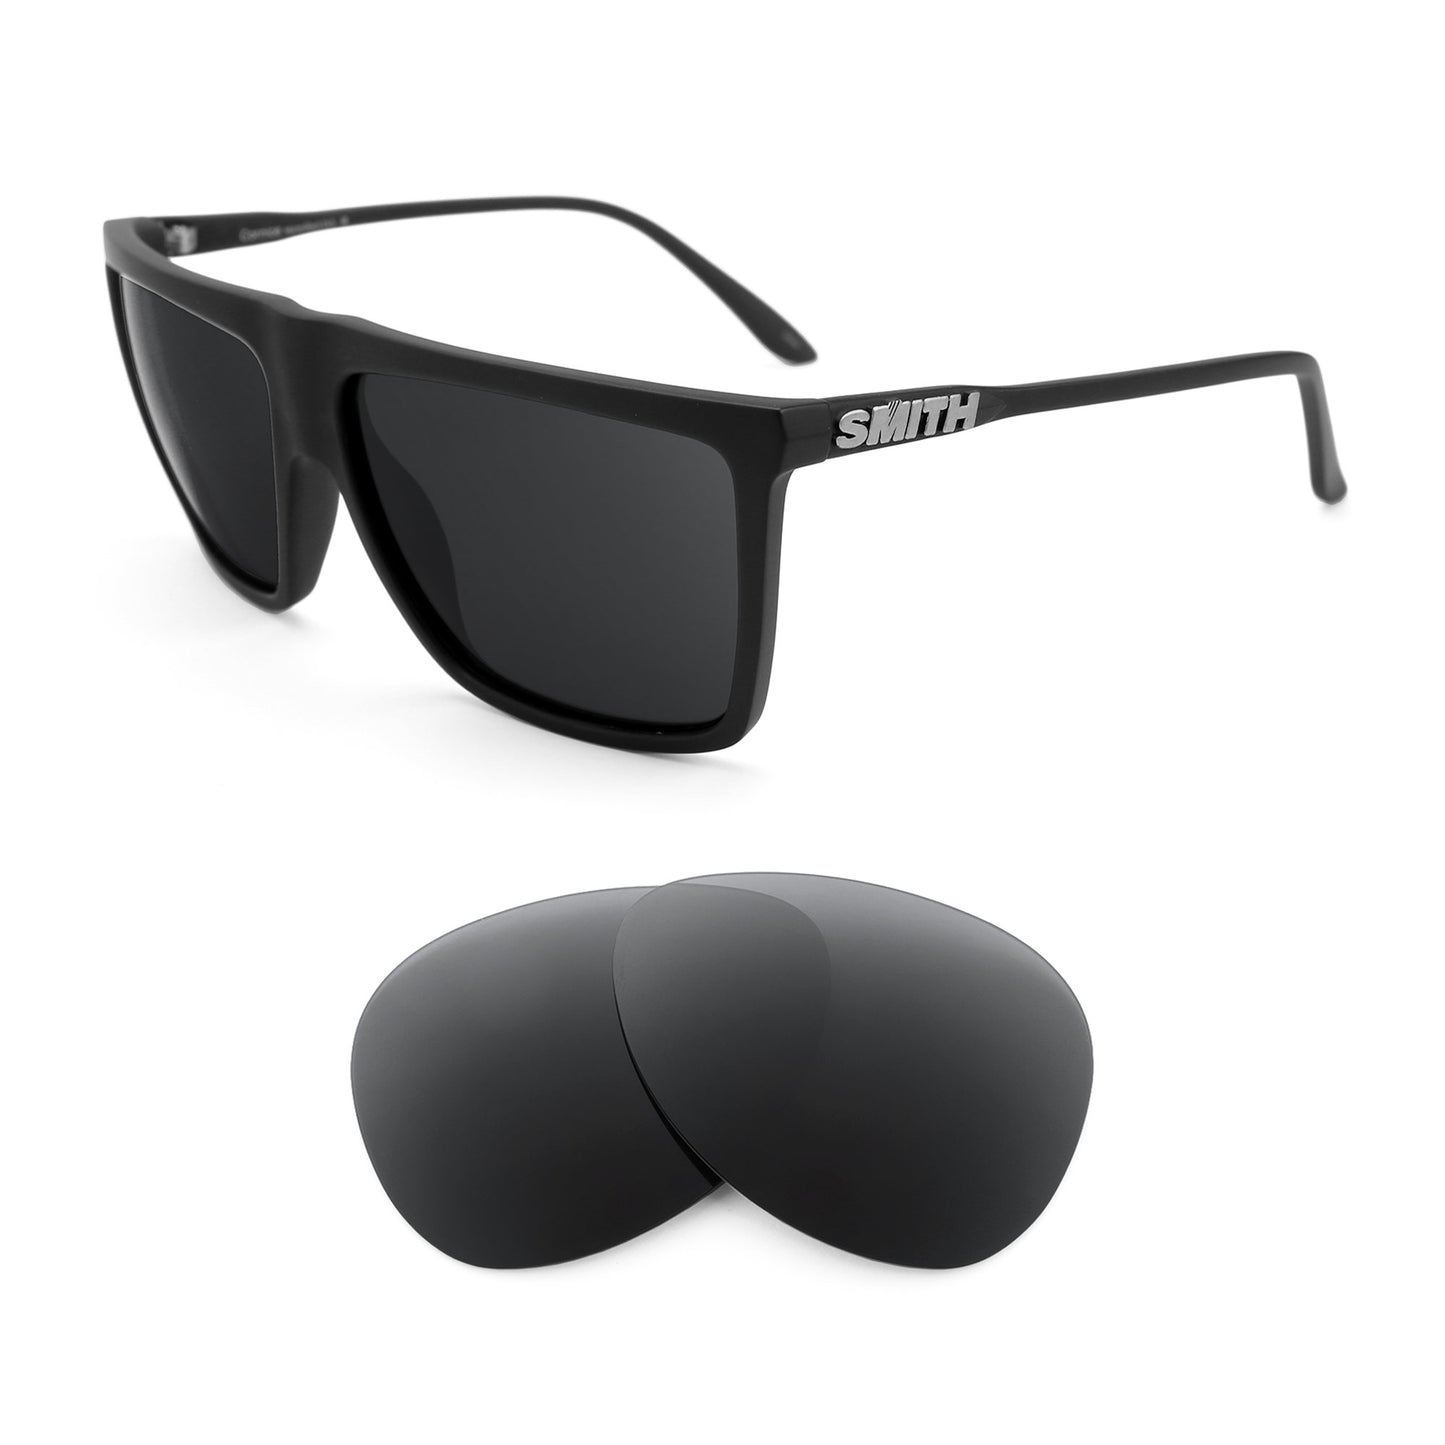 Smith Cornice sunglasses with replacement lenses